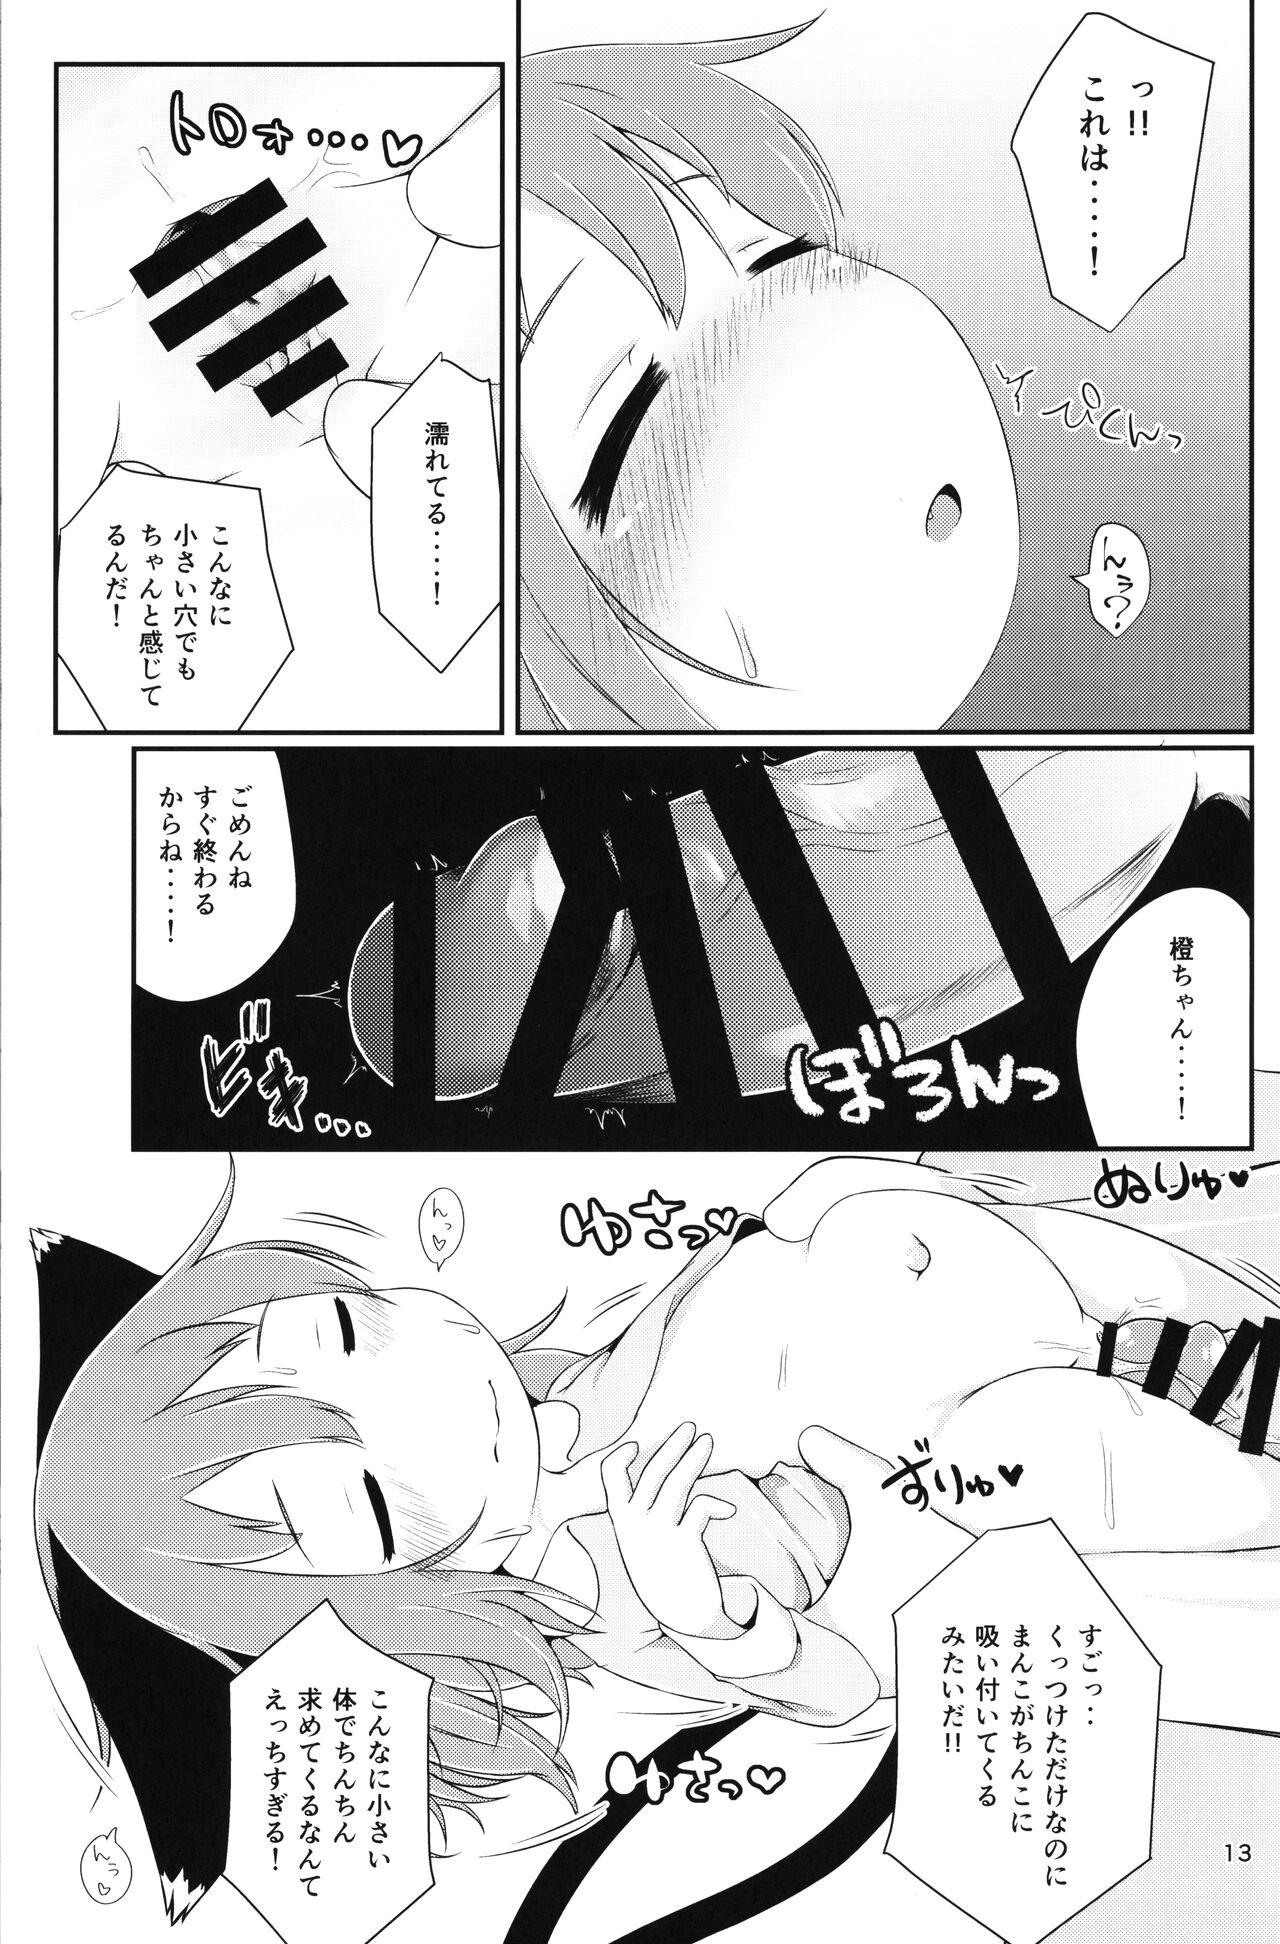 Girls YouChen G - Touhou project Assfingering - Page 13